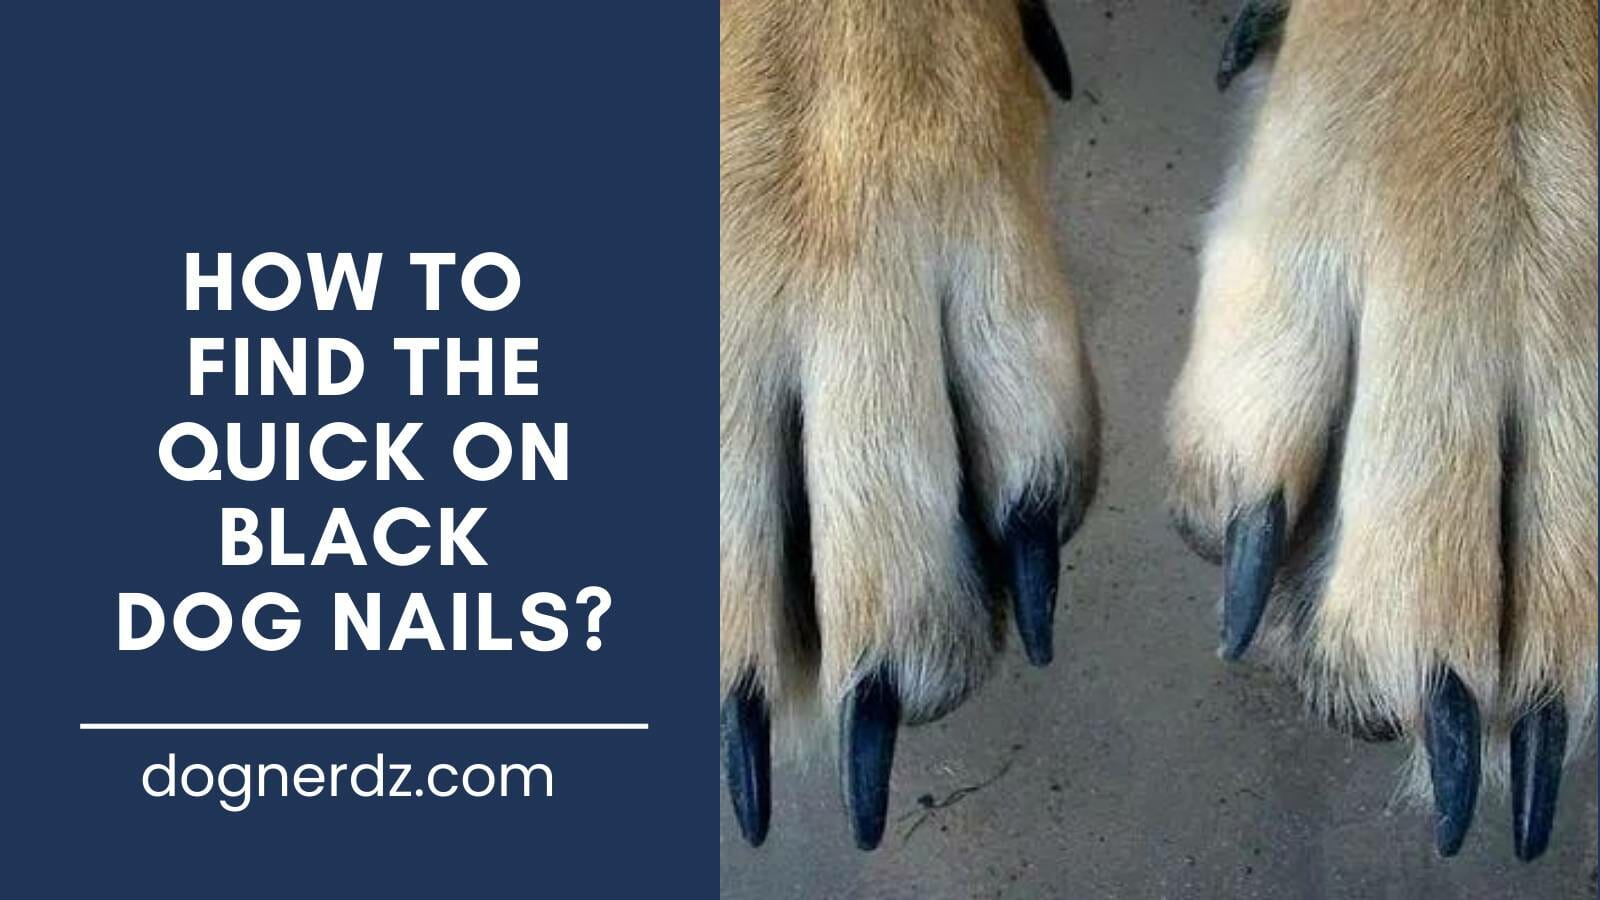 guide on how to find the quick on black dog nails